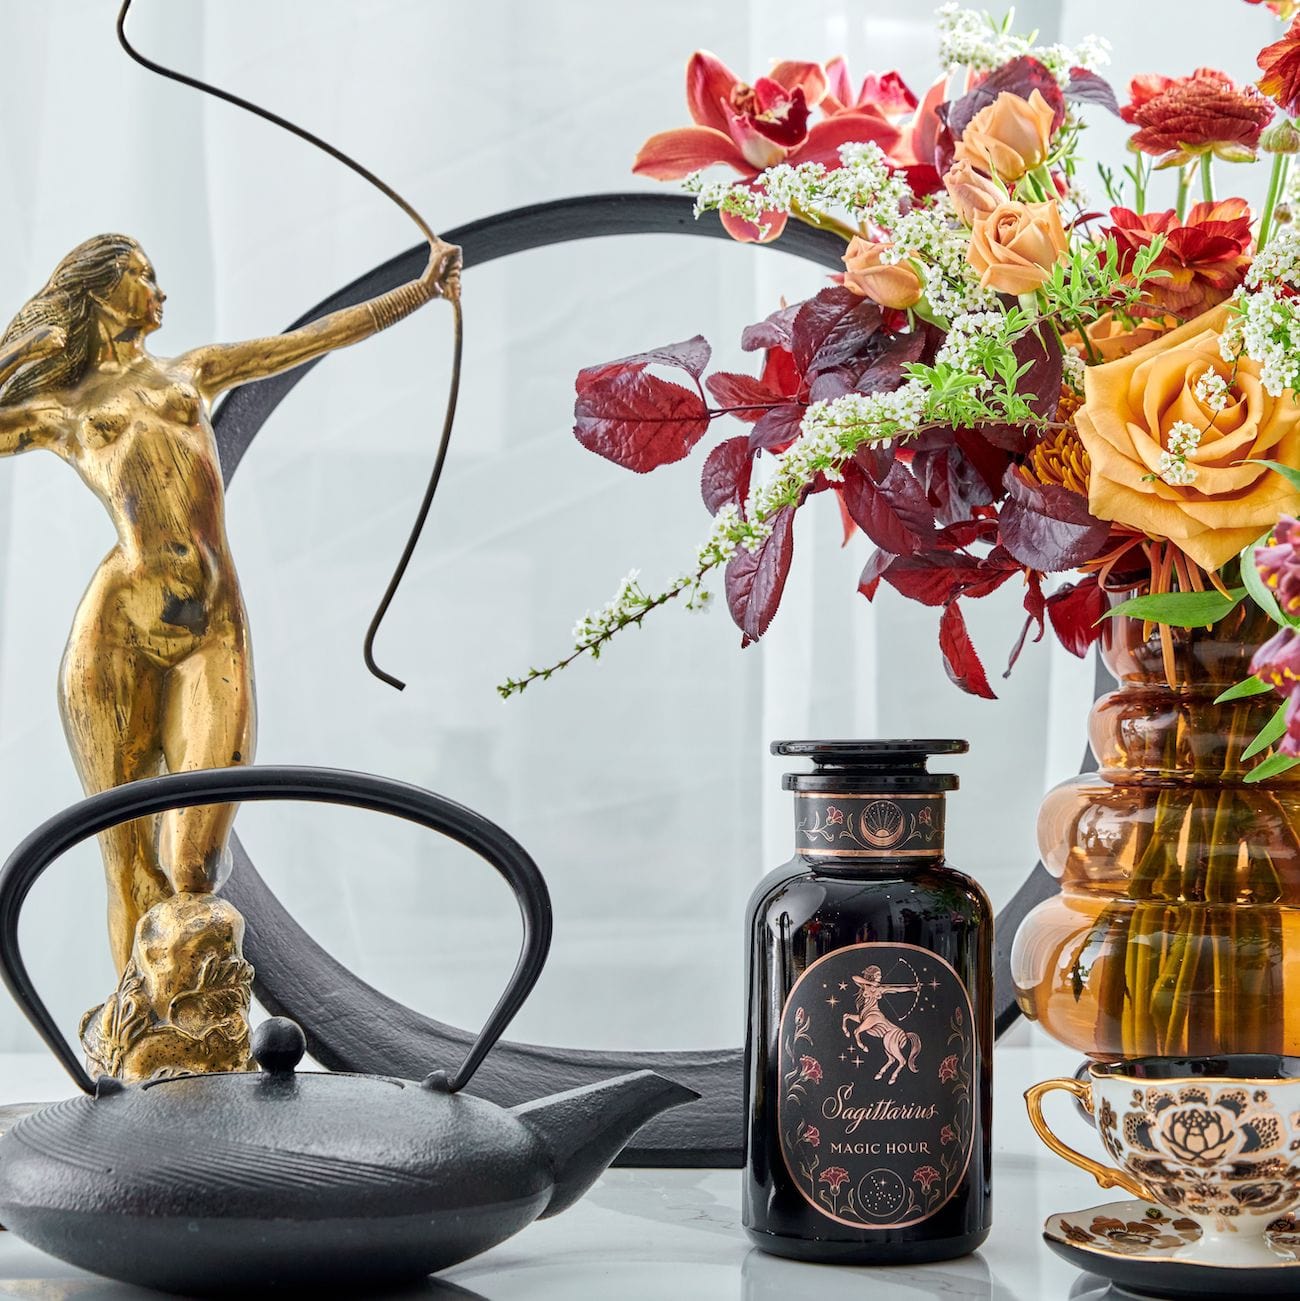 A decorative setup featuring a gold archer statue, a black teapot, a vase with vibrant red, orange, and white flowers, and a black jar labeled "Sagittarius Tea of Good Fortune & Abundance Magic Hour". A teacup and saucer are placed beside the jar, all on a light surface.